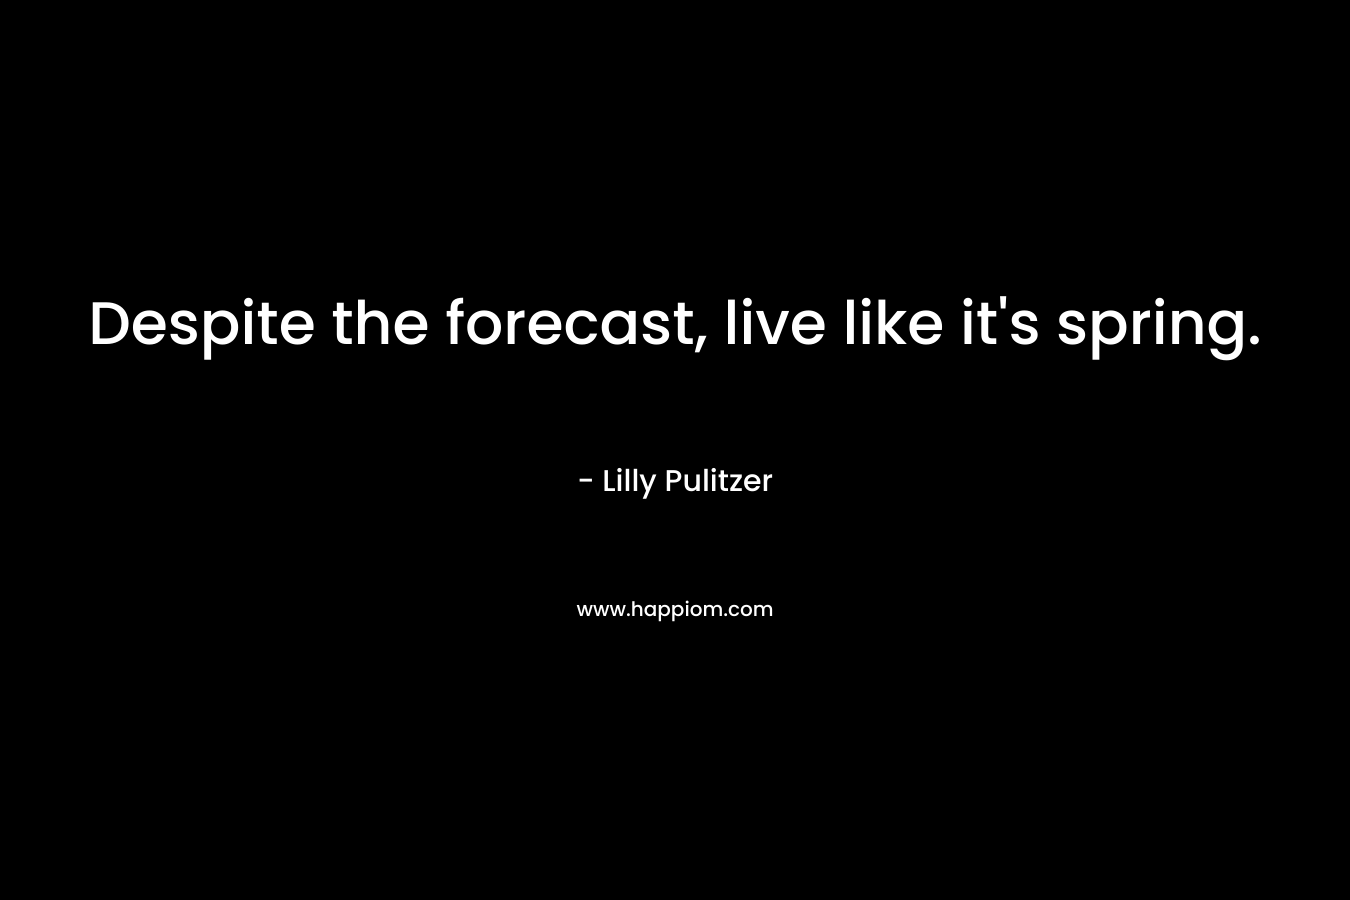 Despite the forecast, live like it’s spring. – Lilly Pulitzer